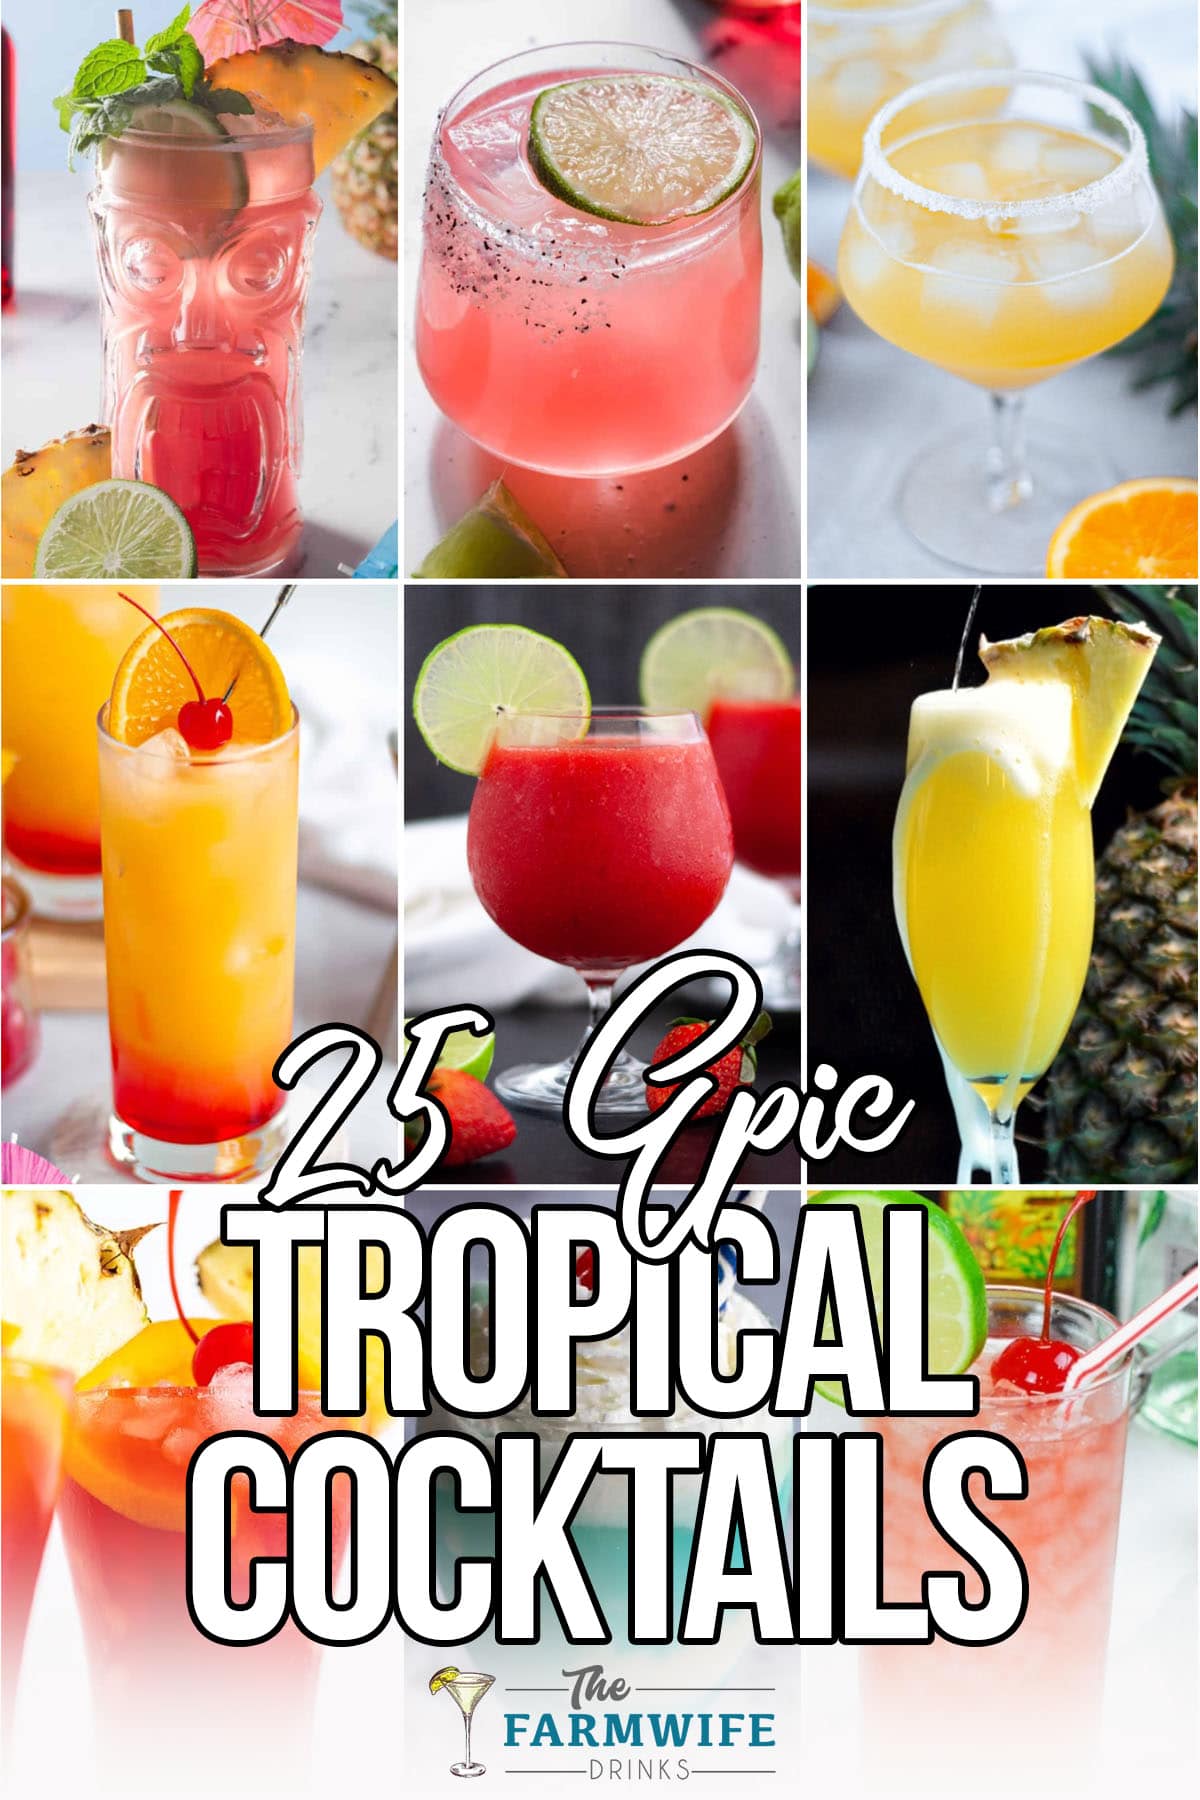 photo collage of tropical drinks with text which reads 25 epic tropical cocktails